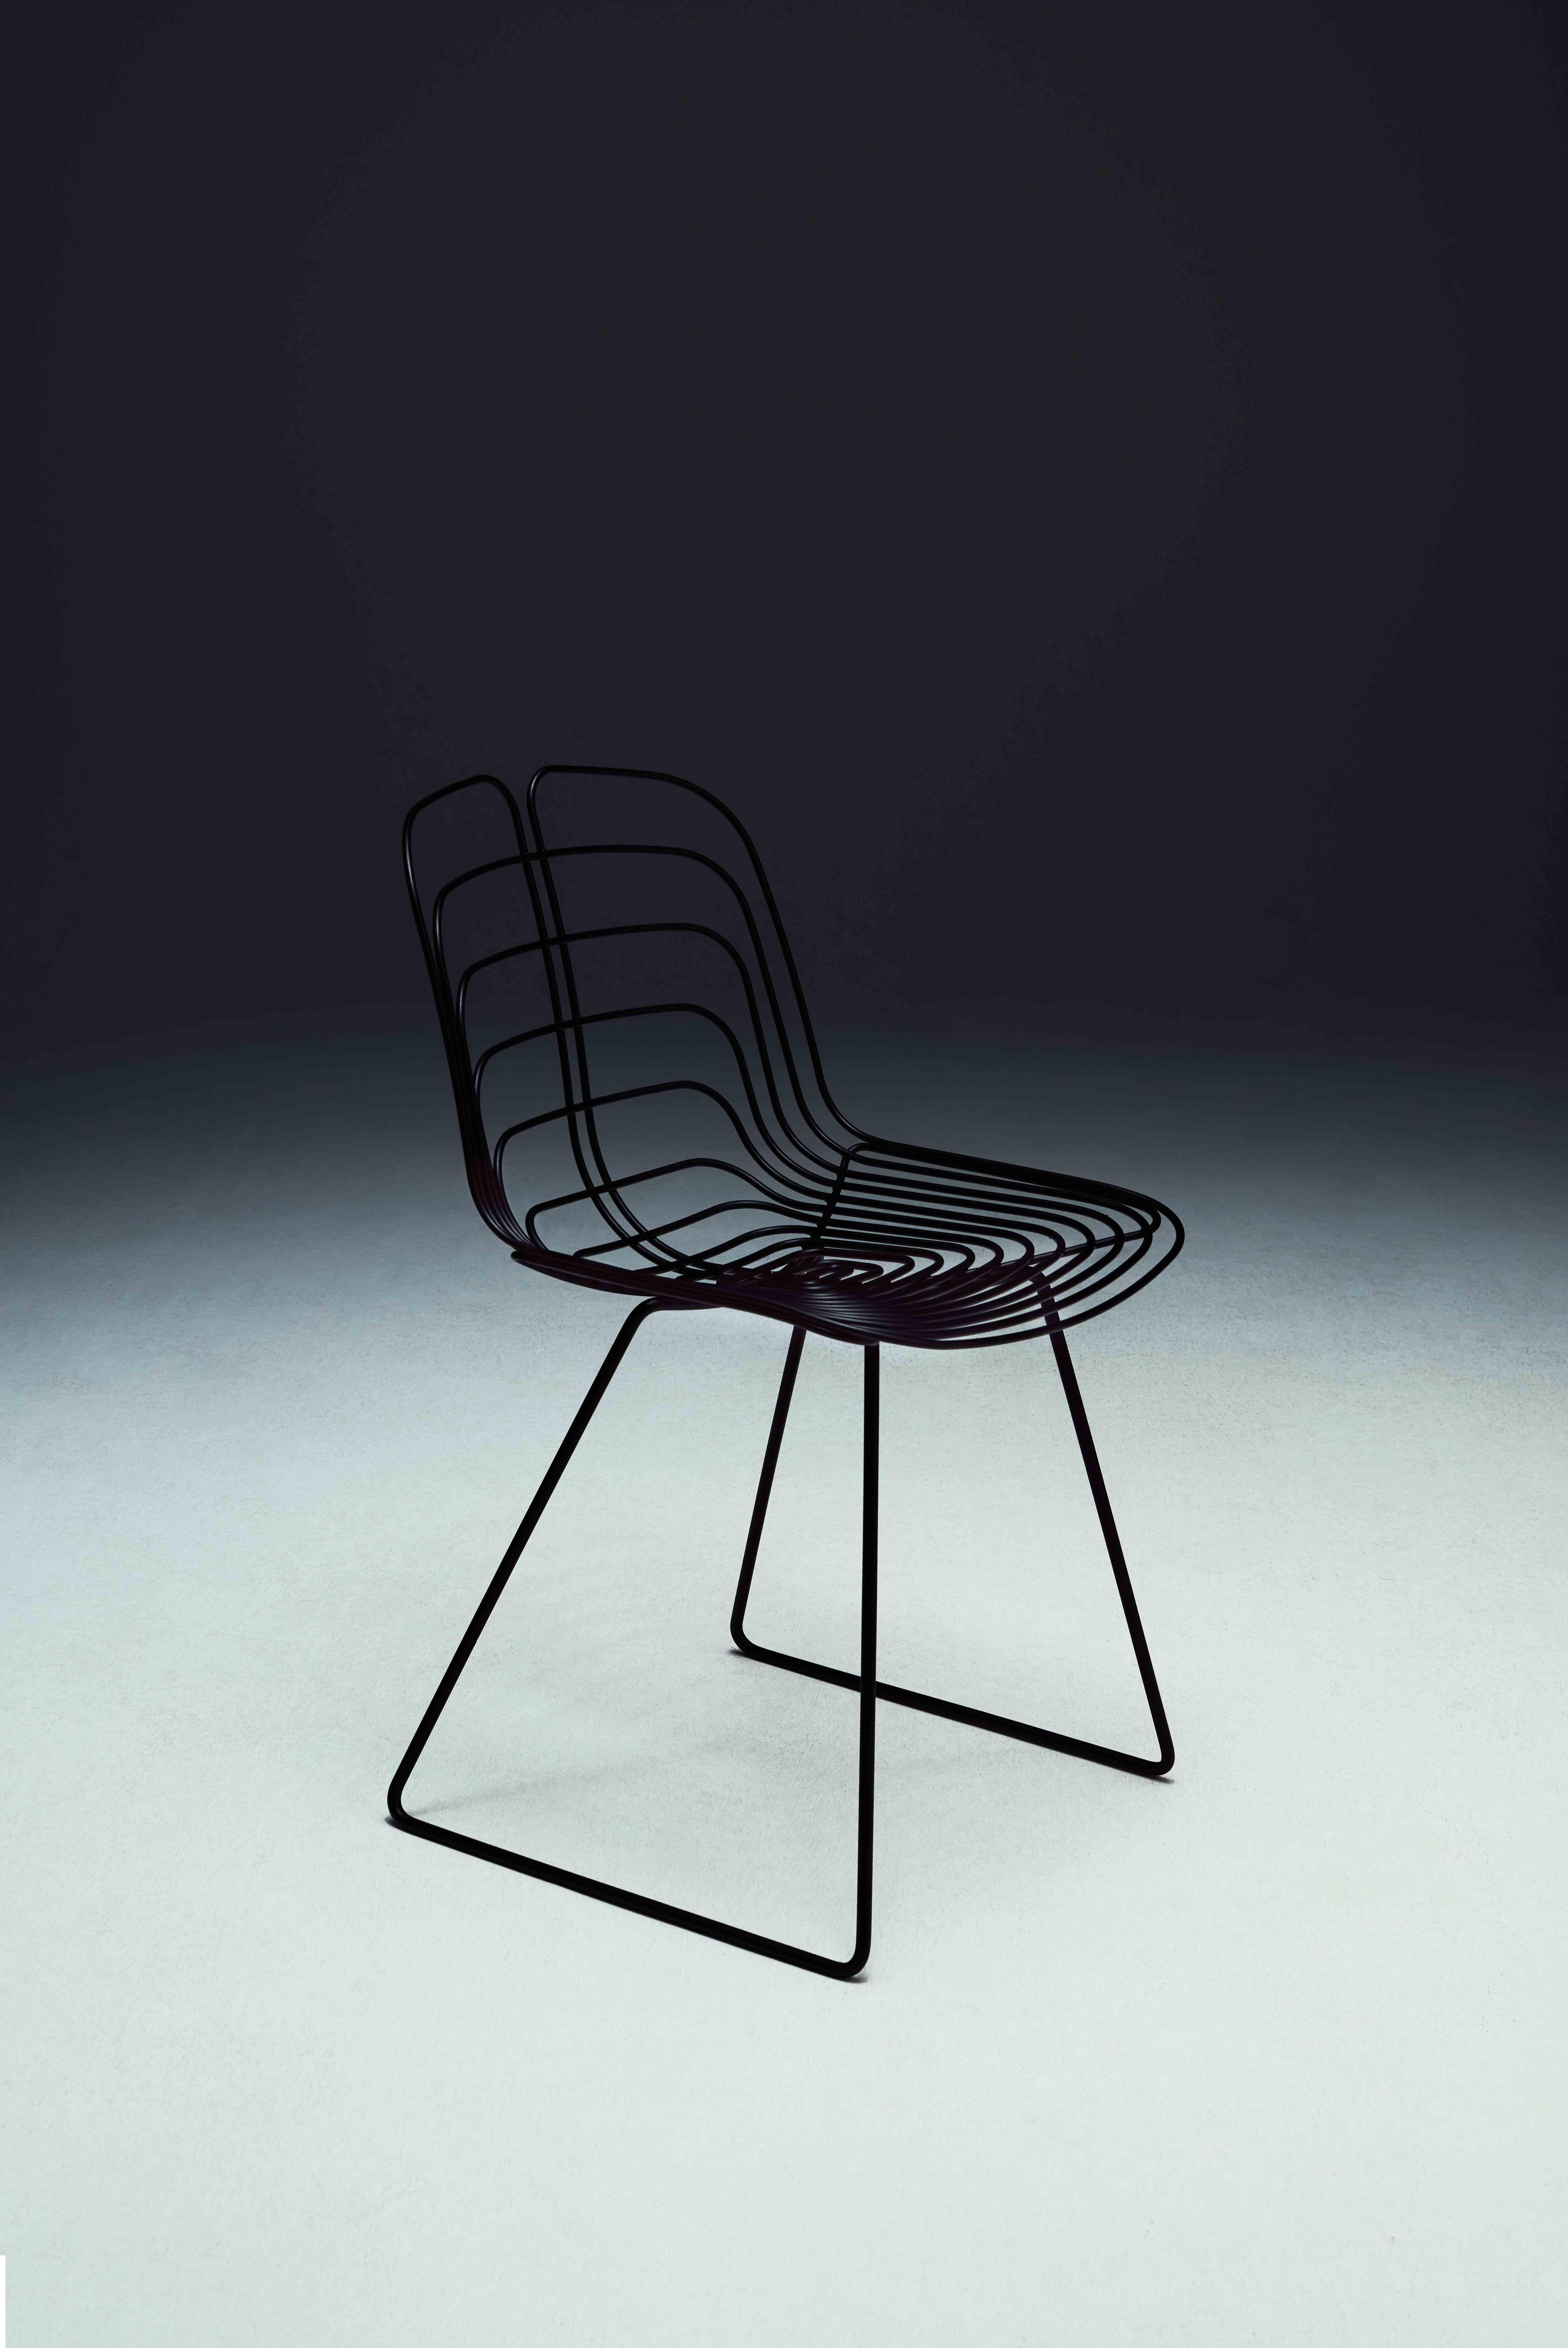 Wired outdoor chair by Michael Young
Sled Base
Dimensions: W 41 x D 51 x H 76 cm
Materials: powder coated metal structure

The wired chair by Michael Young is a proud tribute to Harry Bertoia’s iconic design. This updated take on a classic